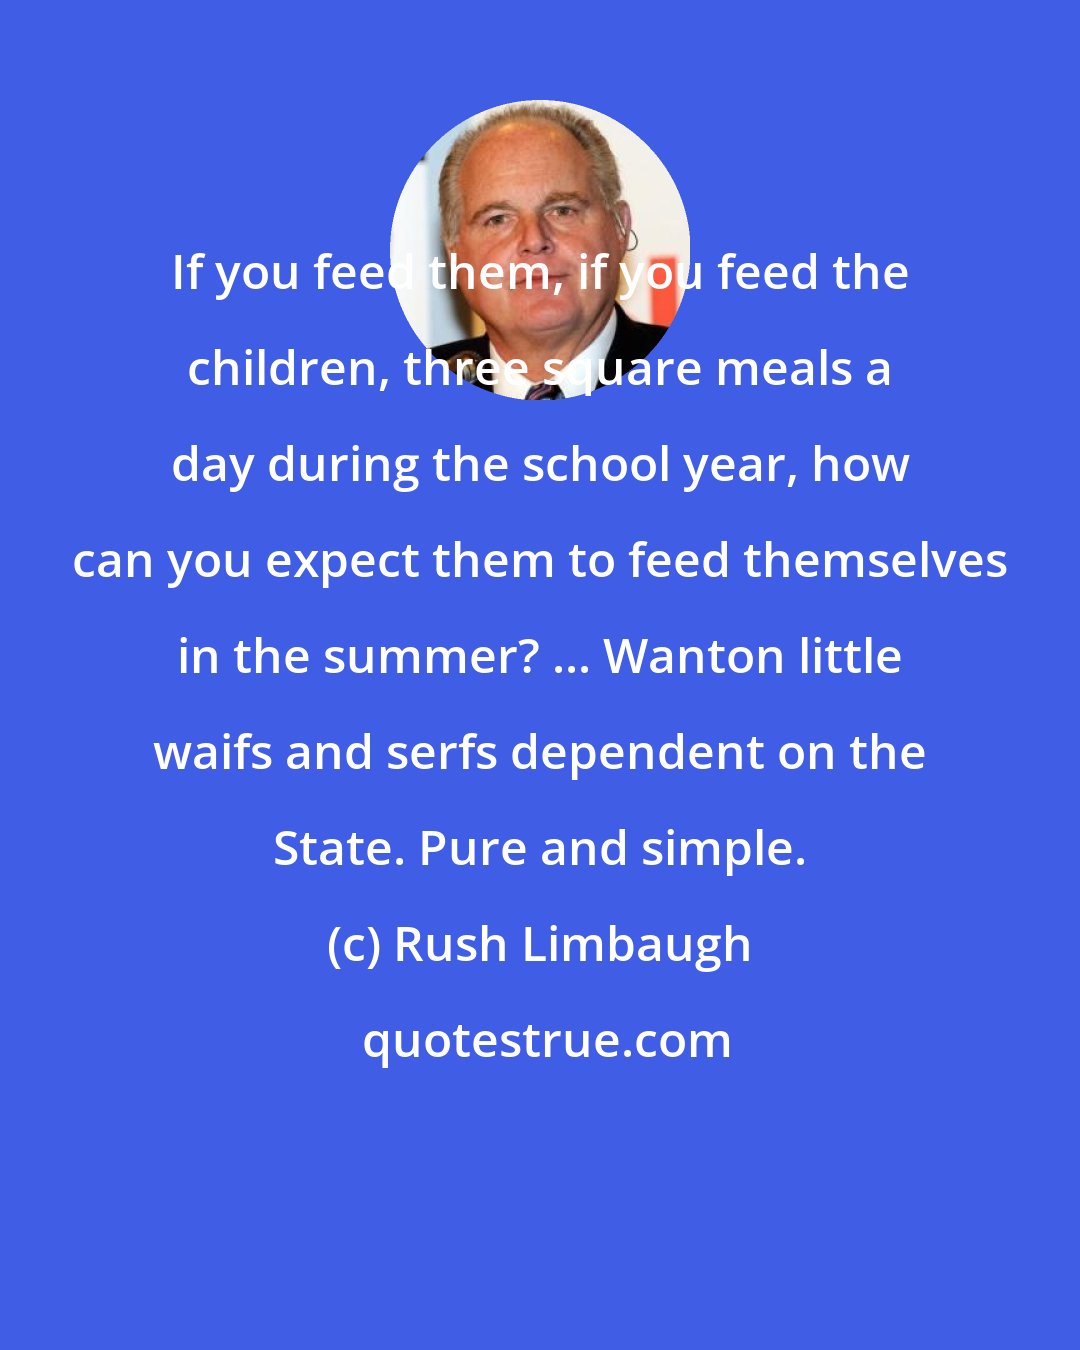 Rush Limbaugh: If you feed them, if you feed the children, three square meals a day during the school year, how can you expect them to feed themselves in the summer? ... Wanton little waifs and serfs dependent on the State. Pure and simple.